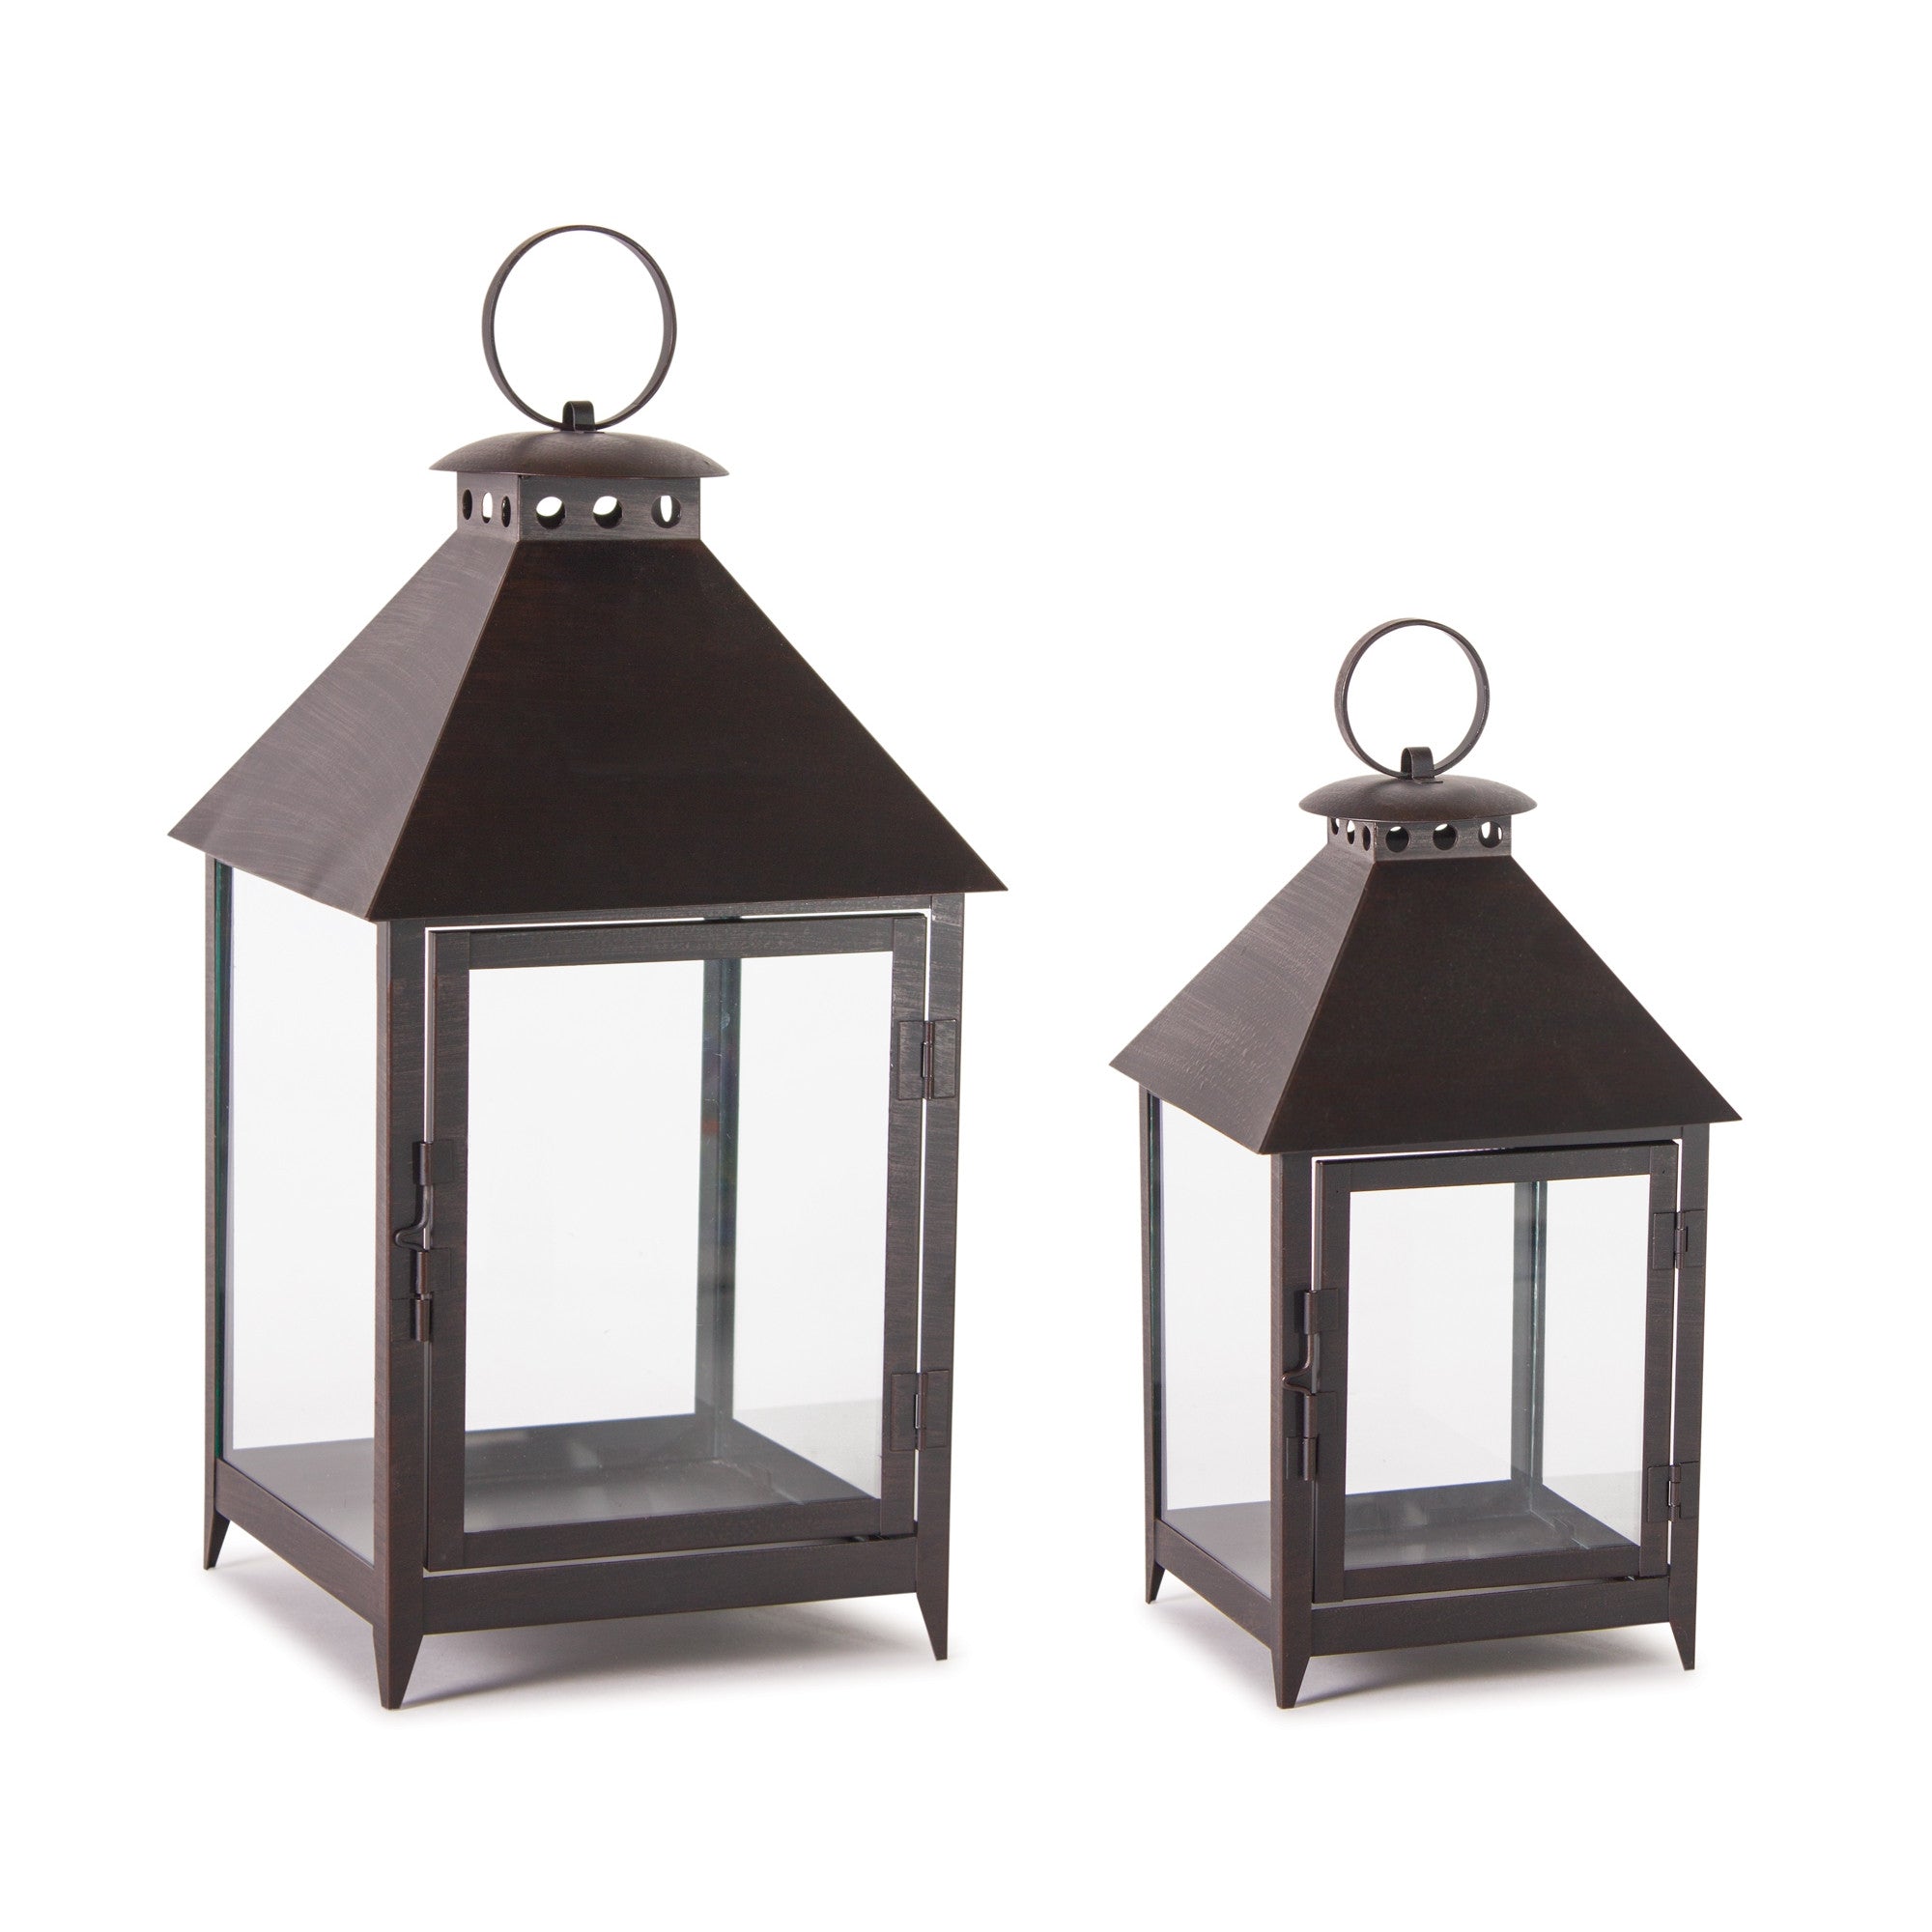 Set Of Two Black Flameless Floor Lantern Candle Holder - Tuesday Morning-Candle Holders